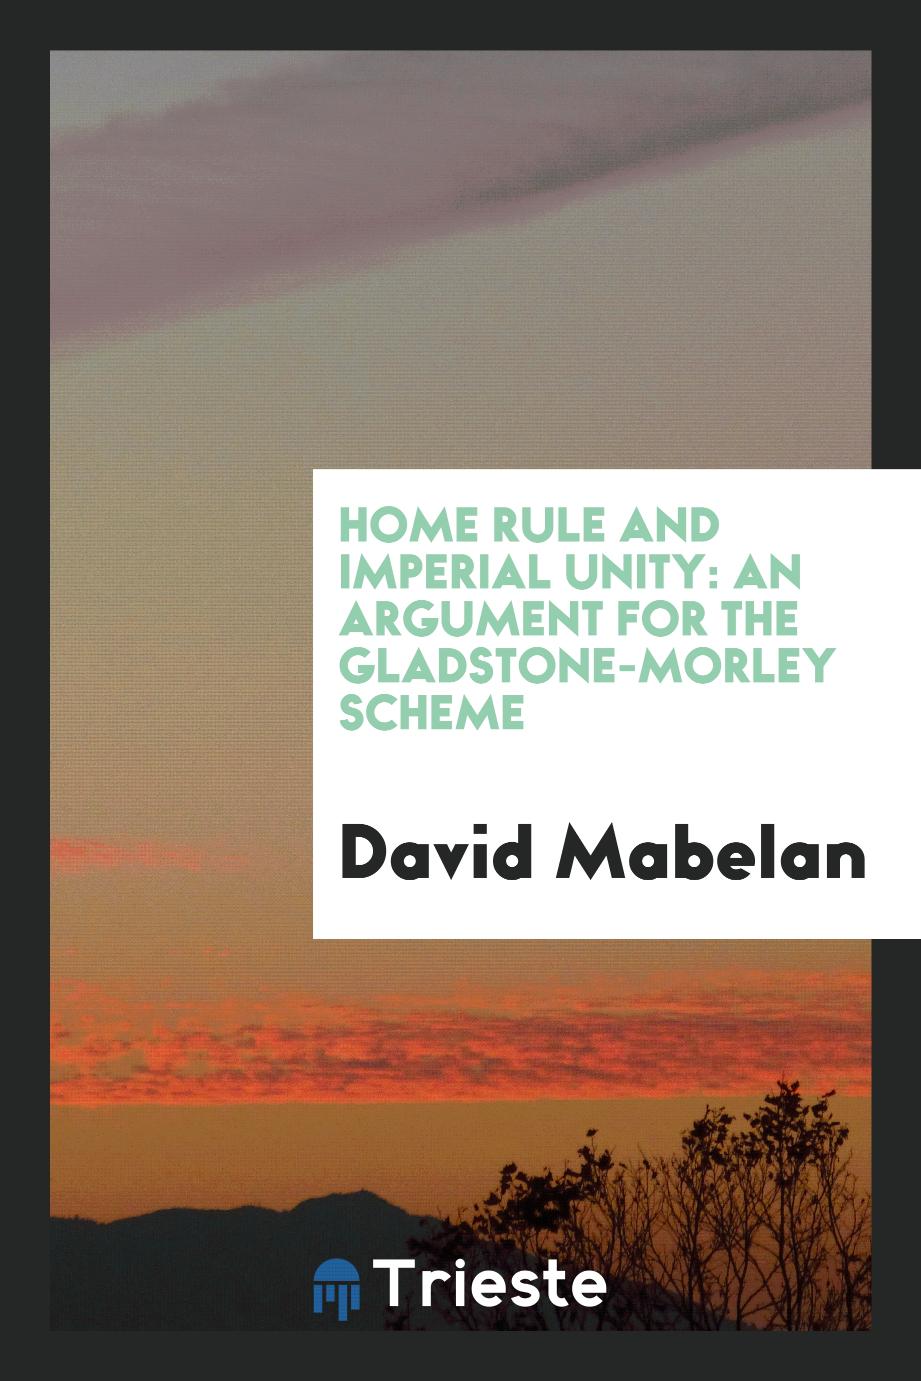 Home Rule and Imperial Unity: An Argument for the Gladstone-Morley Scheme